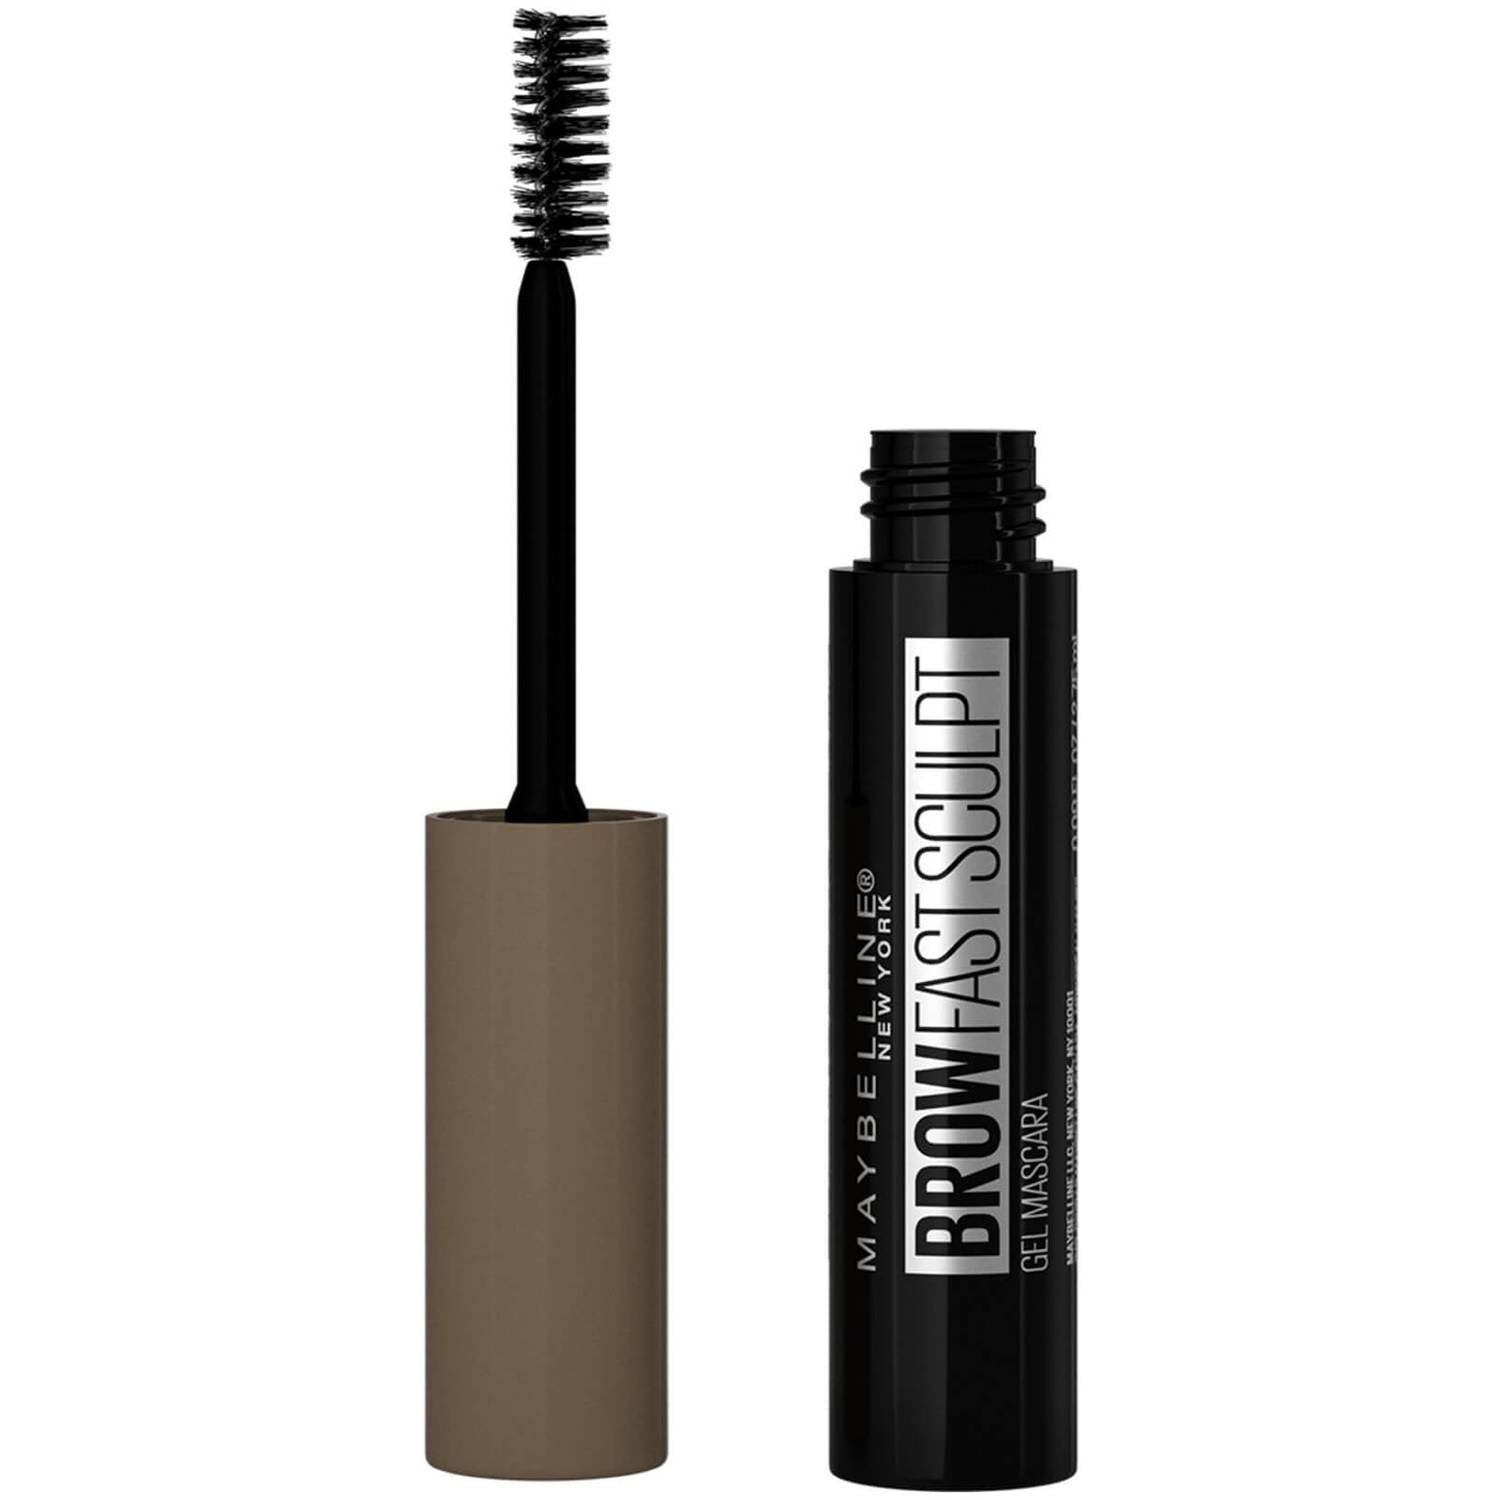 Maybelline Brow Fast Sculpt - Give Us Beauty